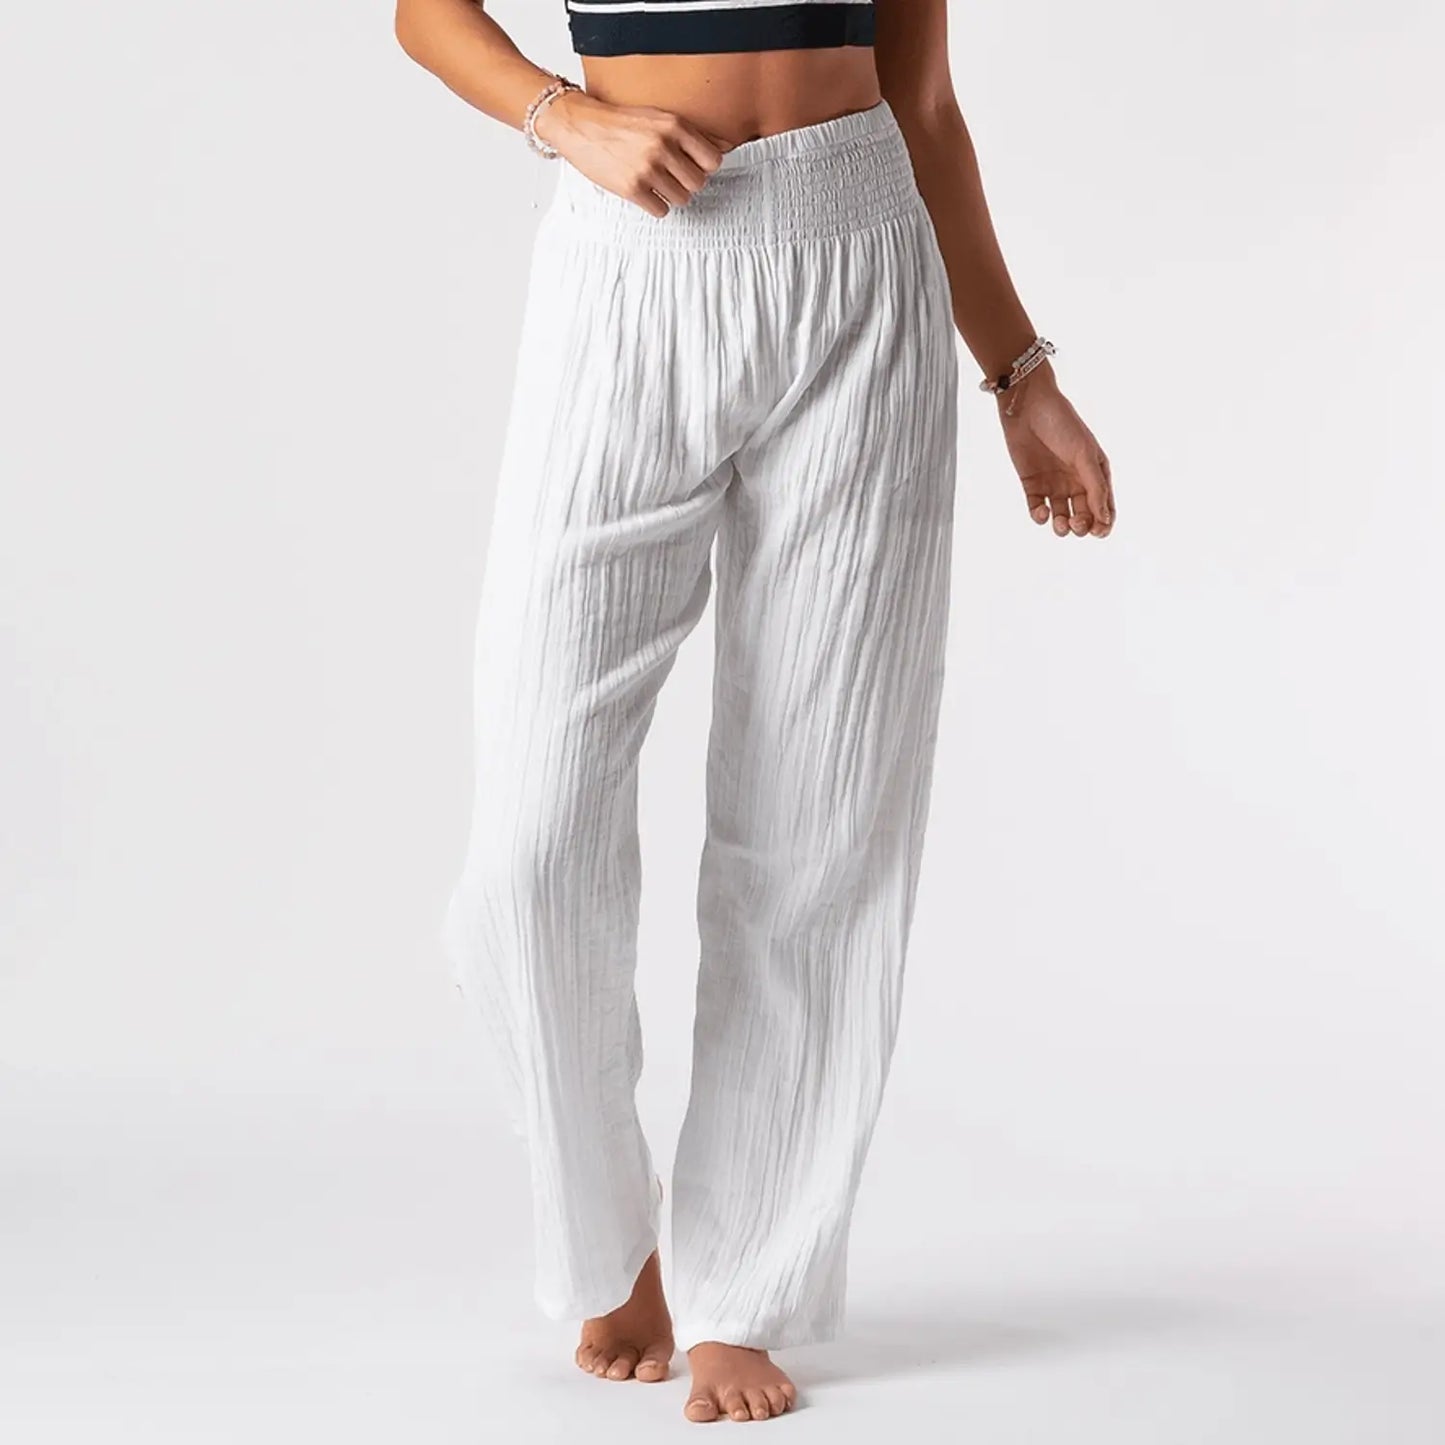 white beach pants made of cotton